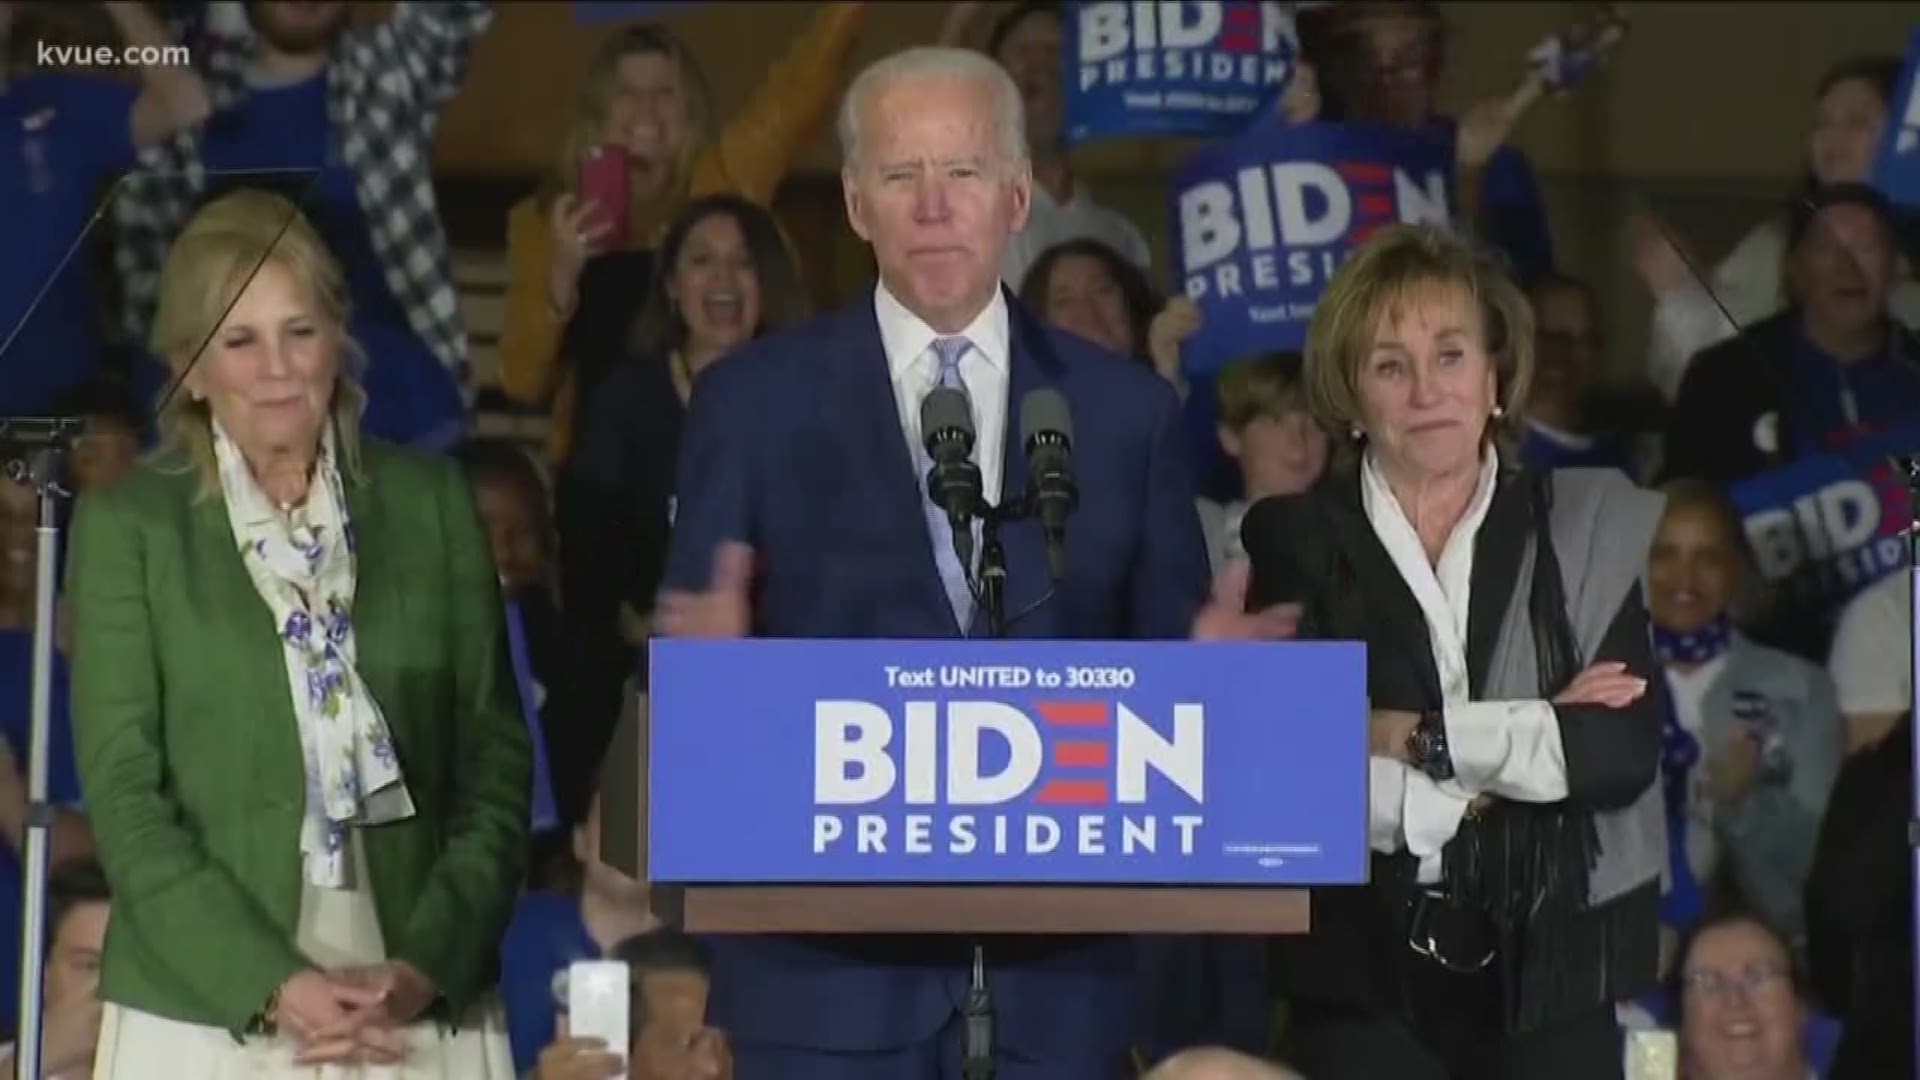 Former Vice President Joe Biden won the Democratic presidential primary in the Lone Star State – but other races on the ballot are headed to runoffs.